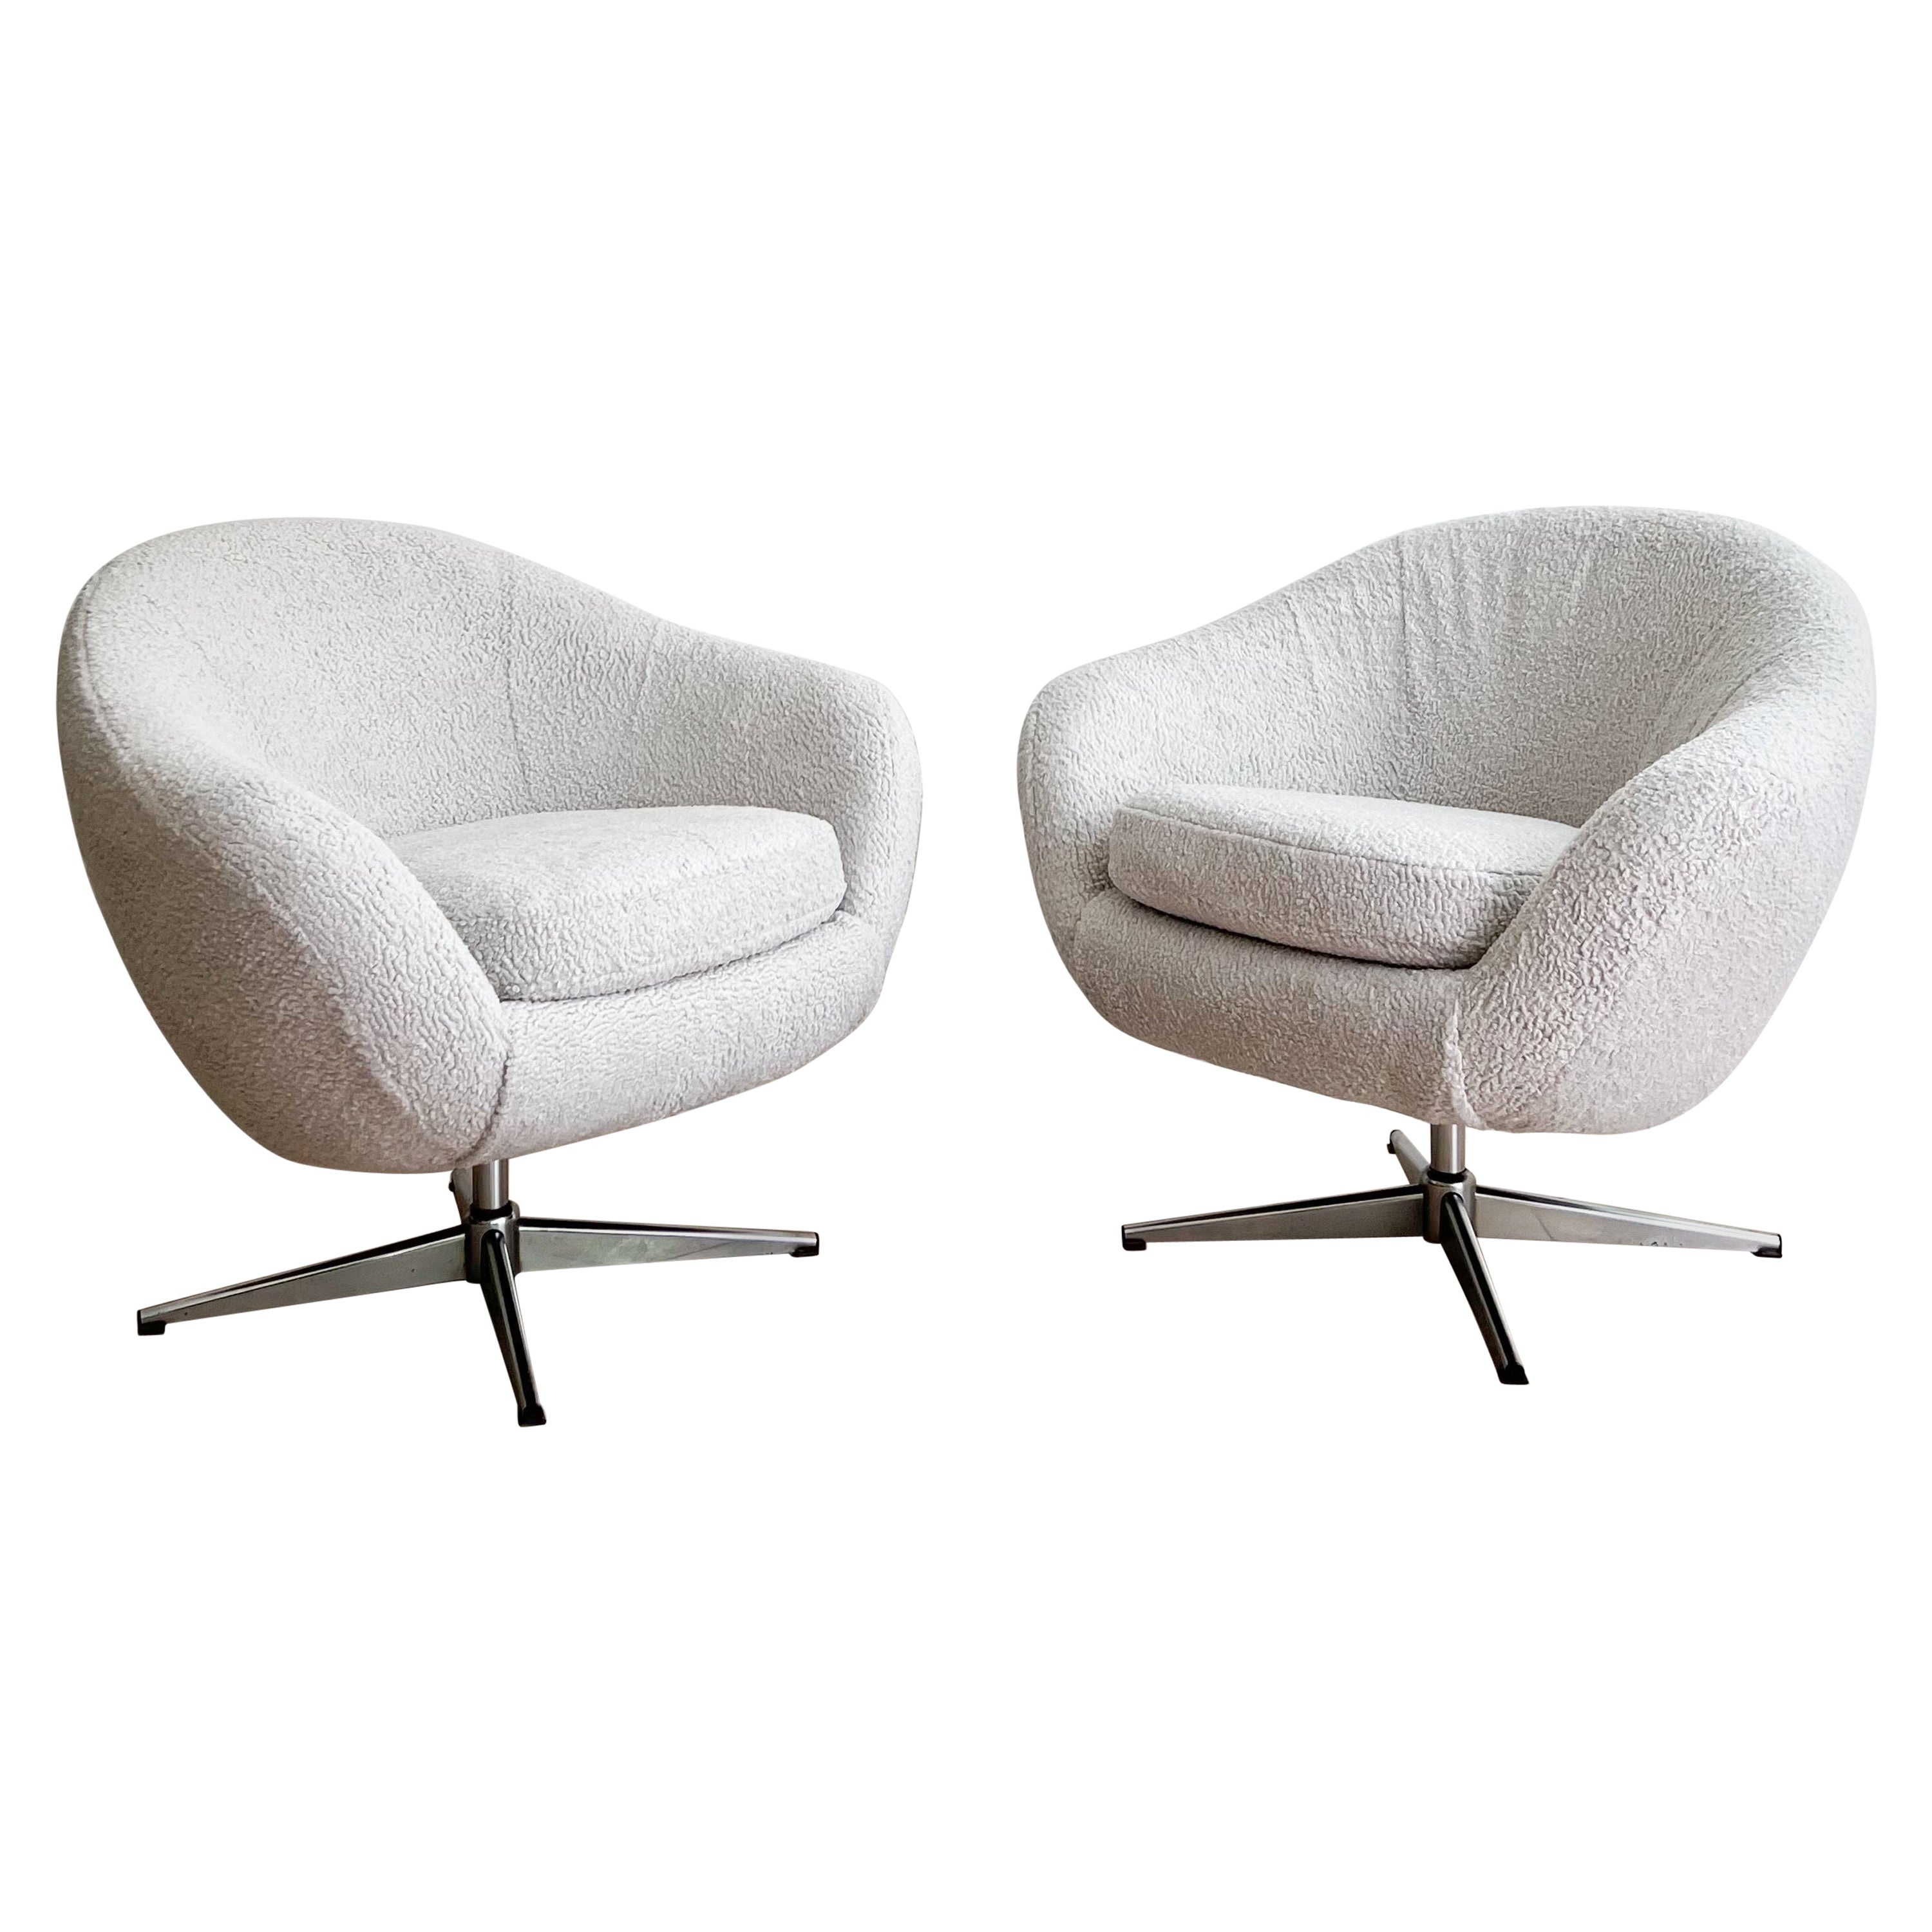 Pair of Swivel Pod Lounge Chairs w/ New Shearling Upholstery For Sale